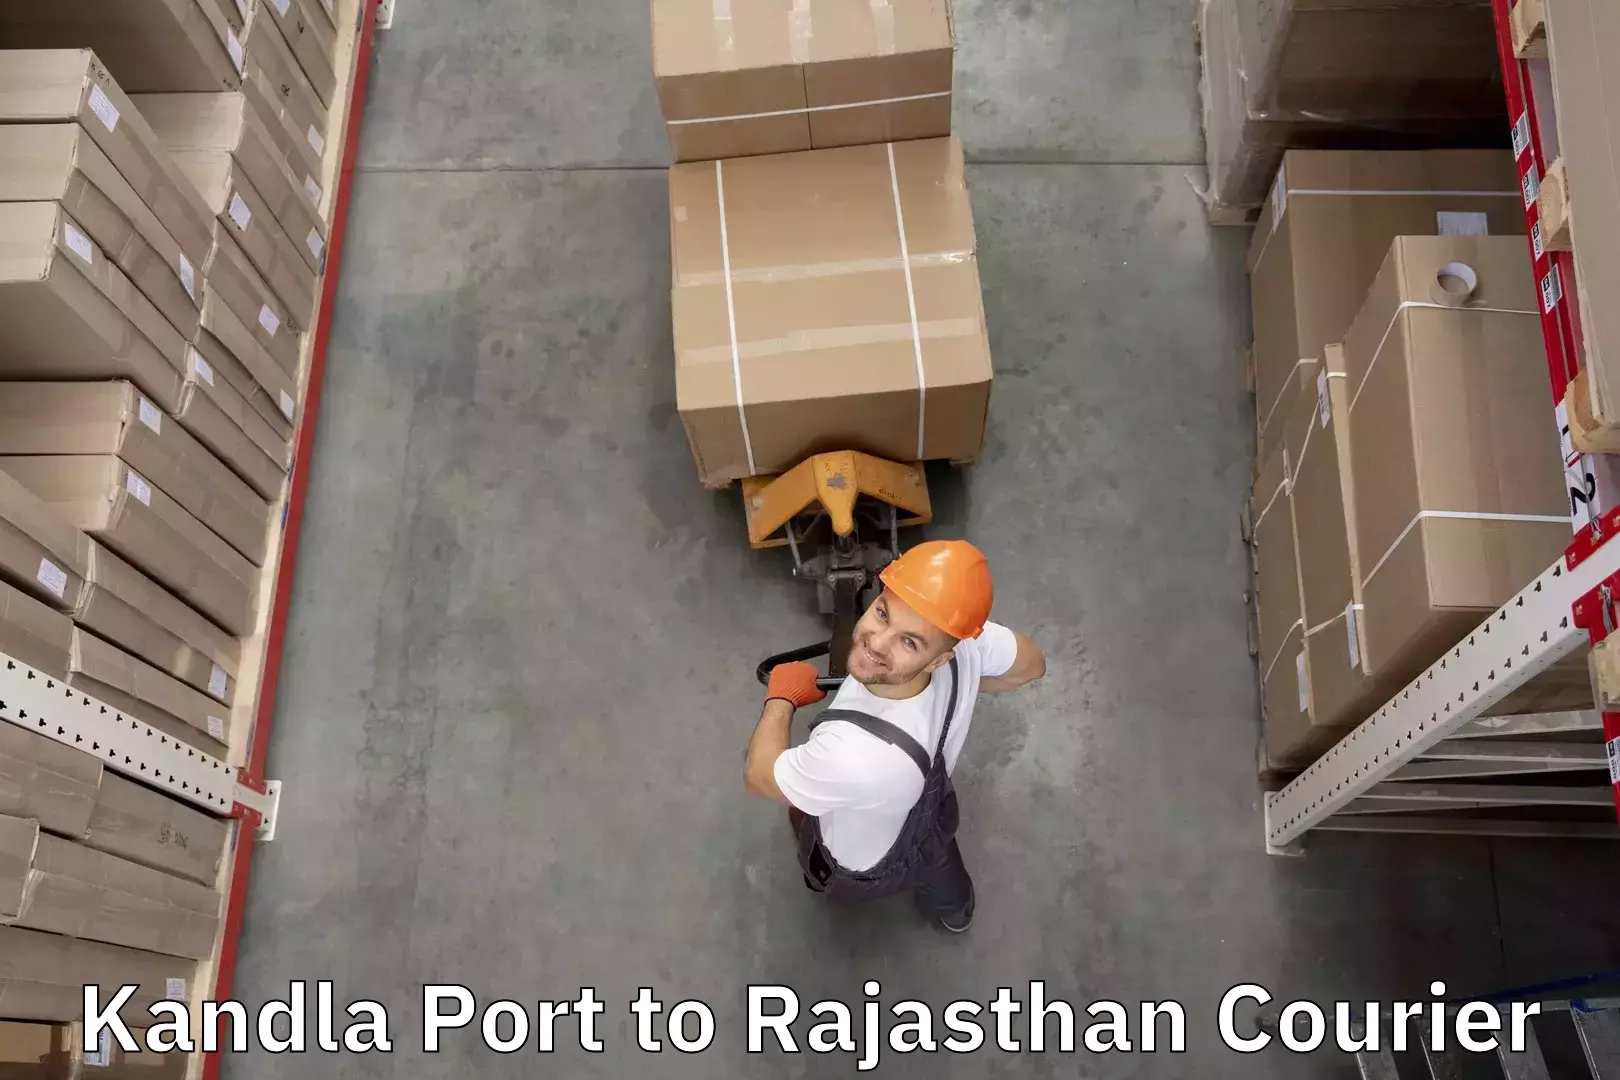 Expedited baggage courier Kandla Port to Fatehpur Sikar